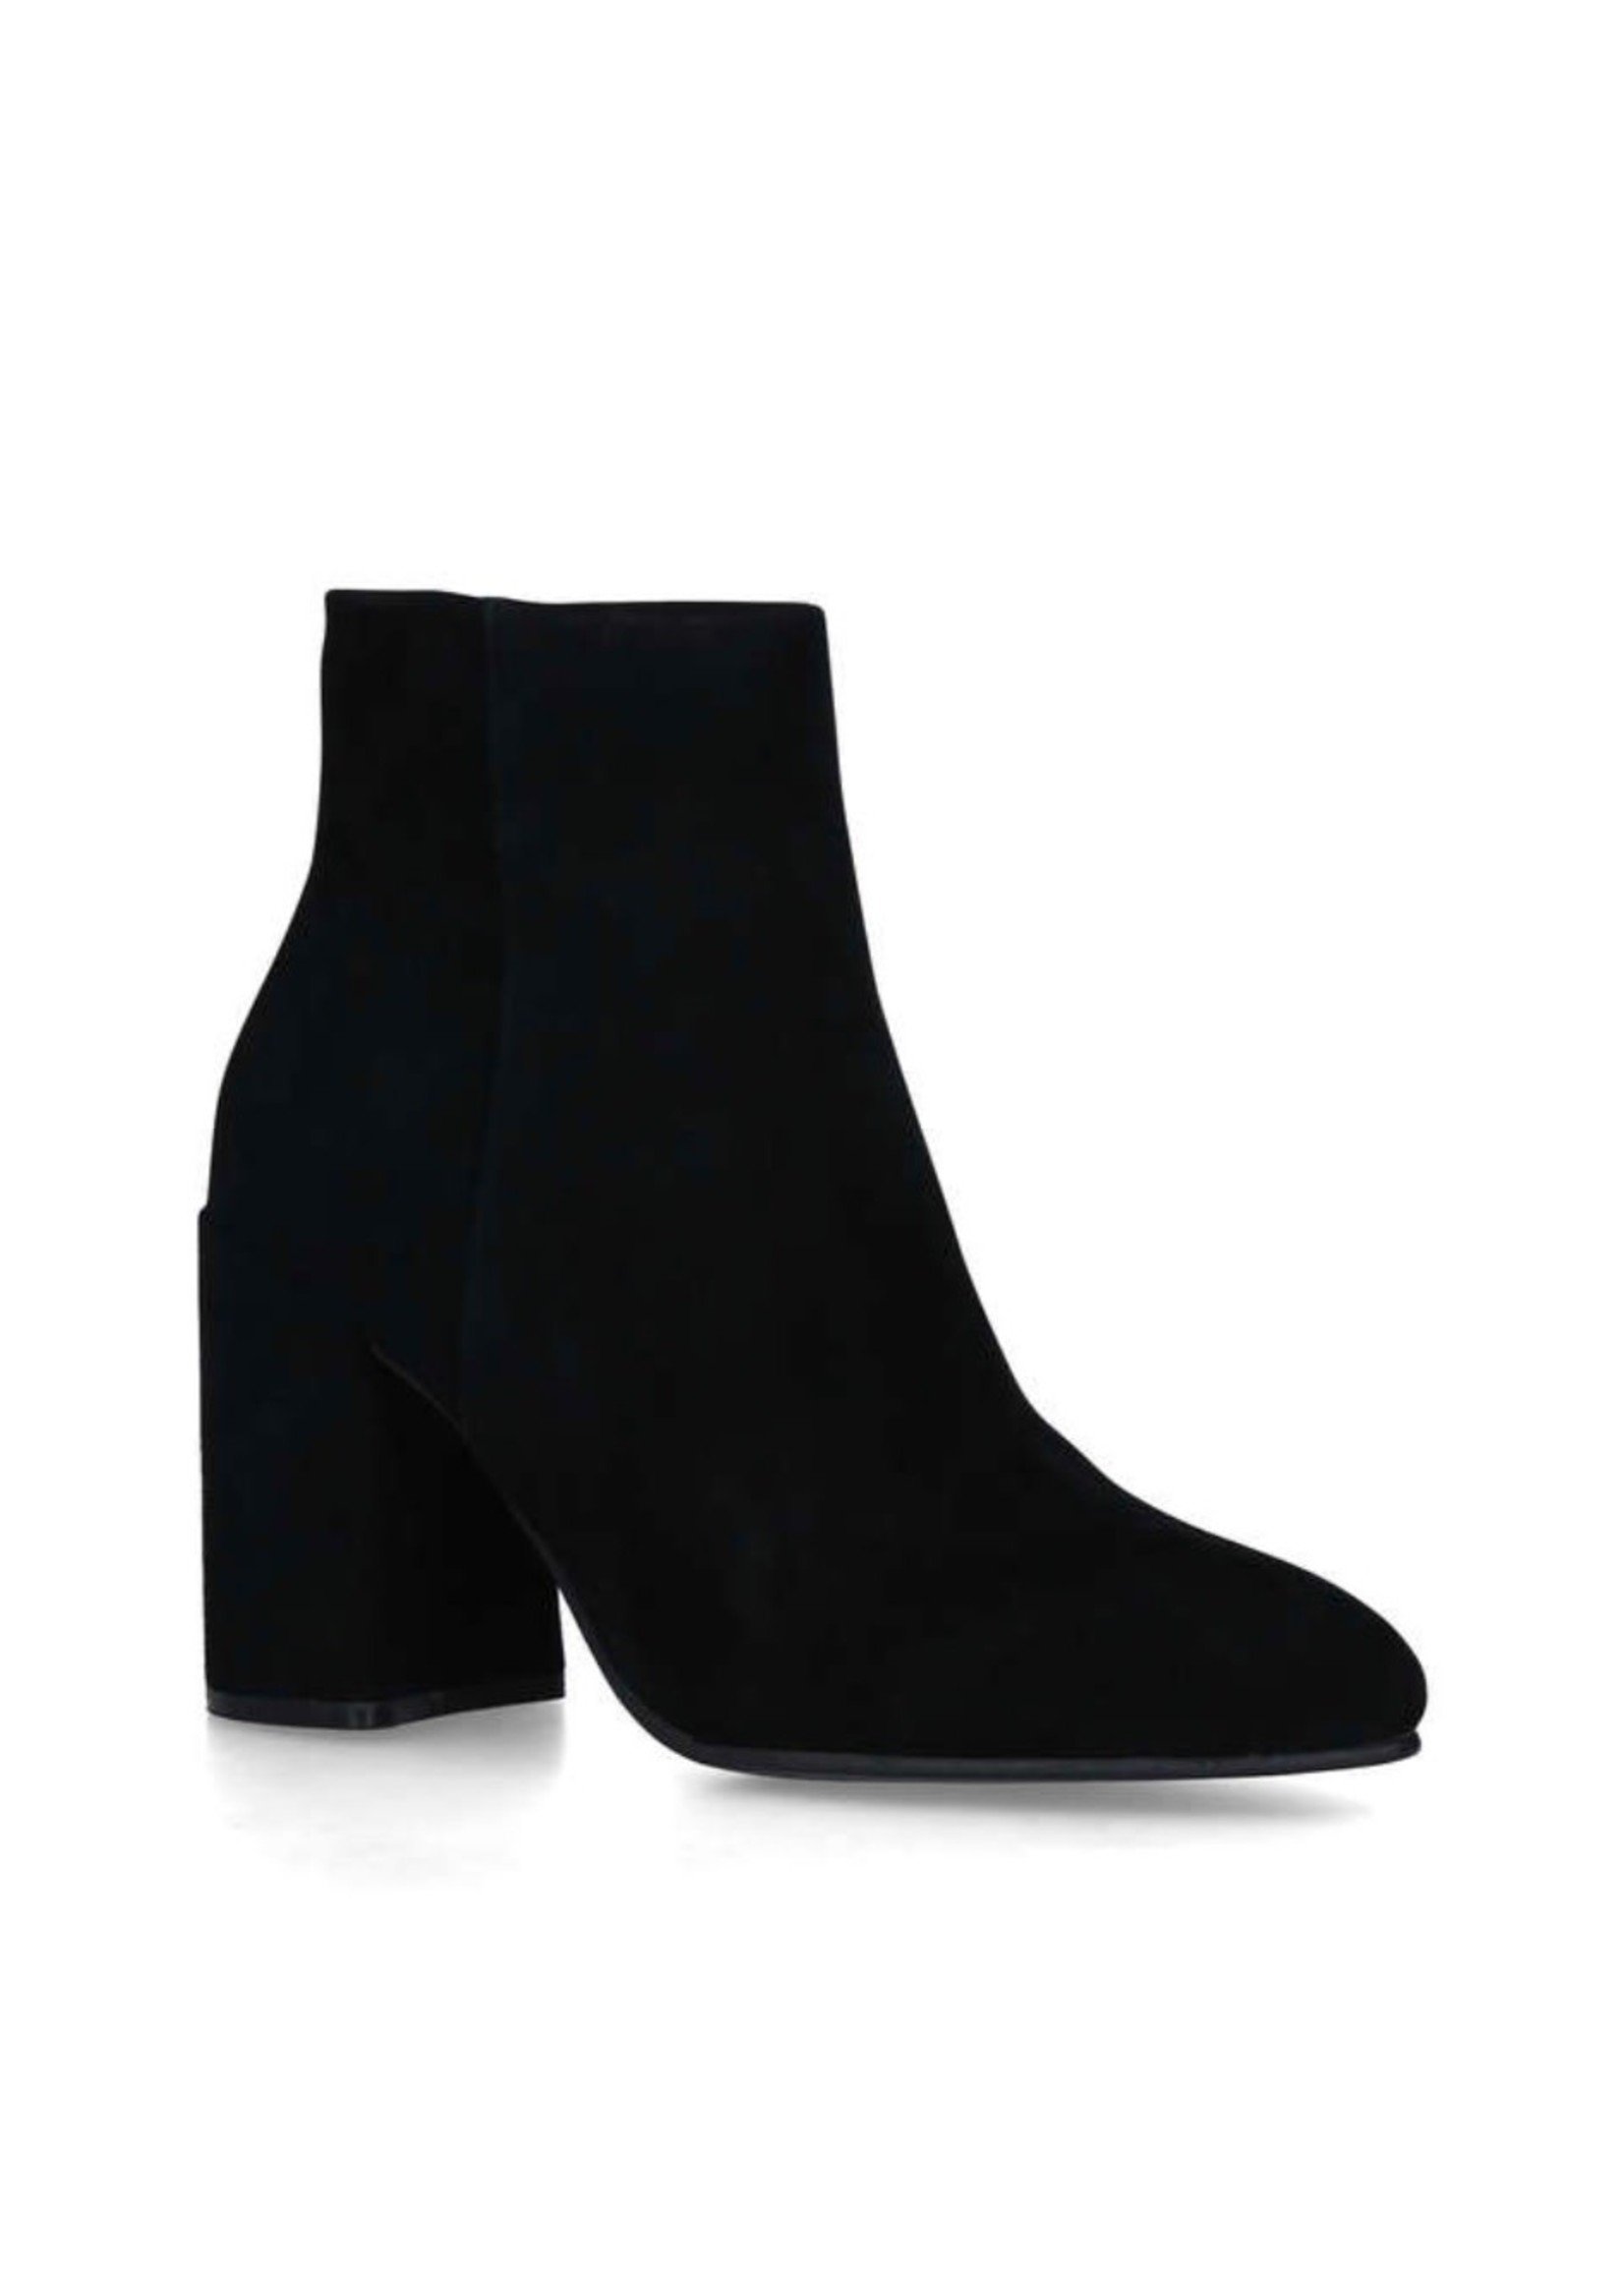 STEVE MADDEN The TERESE Suede Booties